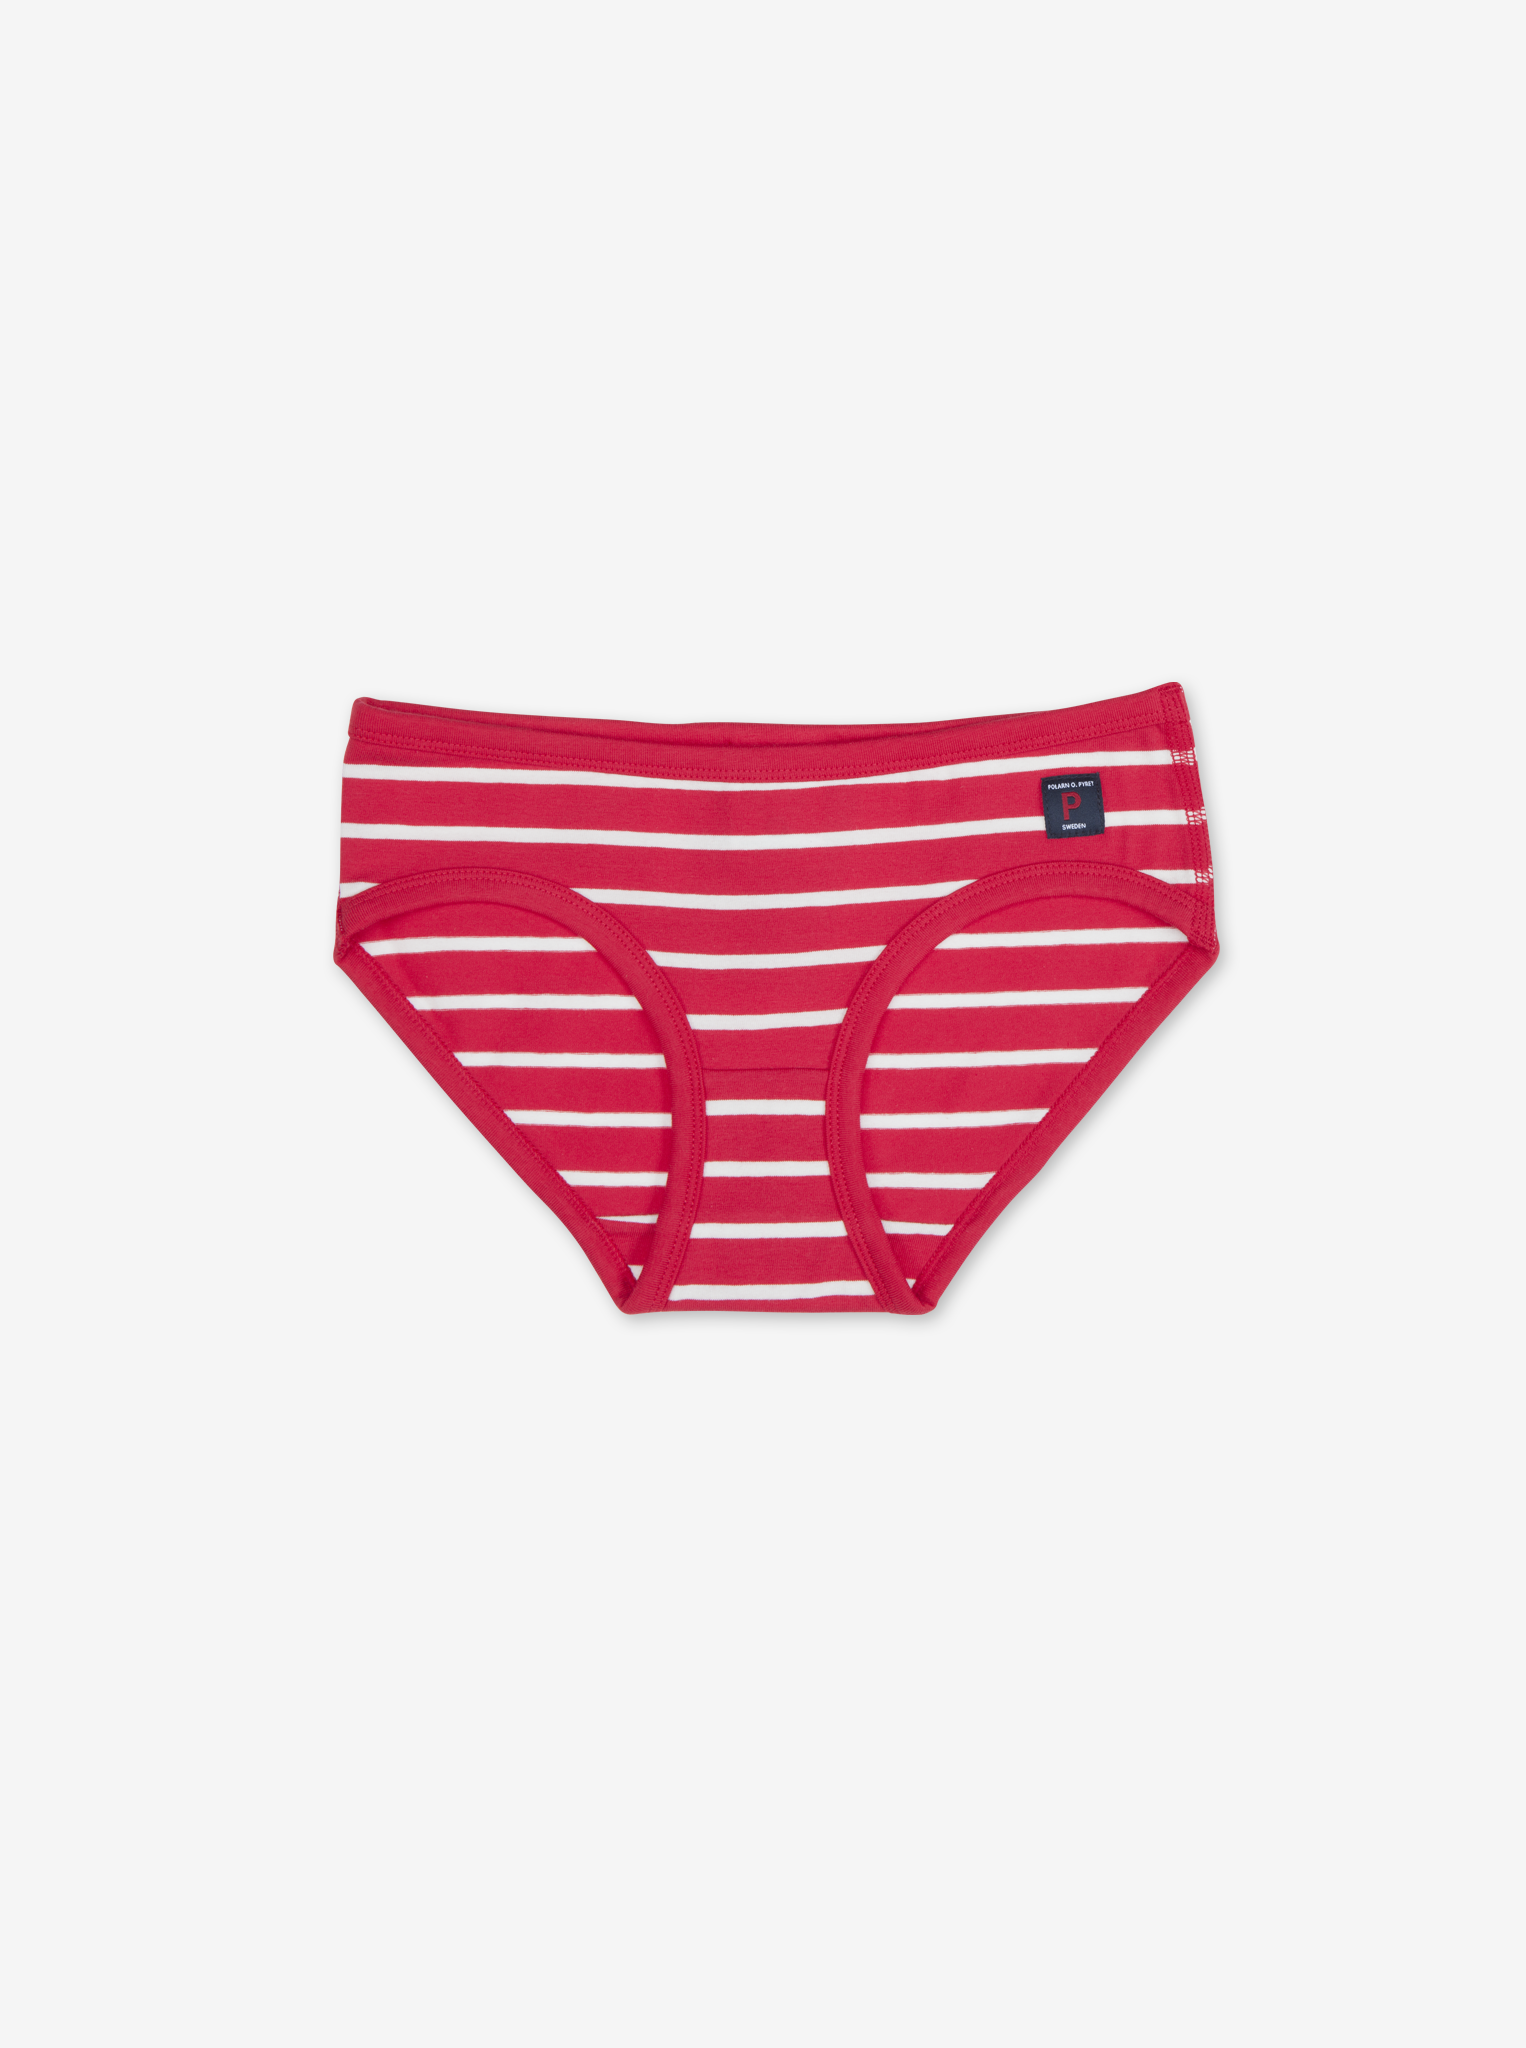 girls comfortable organic cotton red and white stripe briefs pants, quality polarn o. pyret